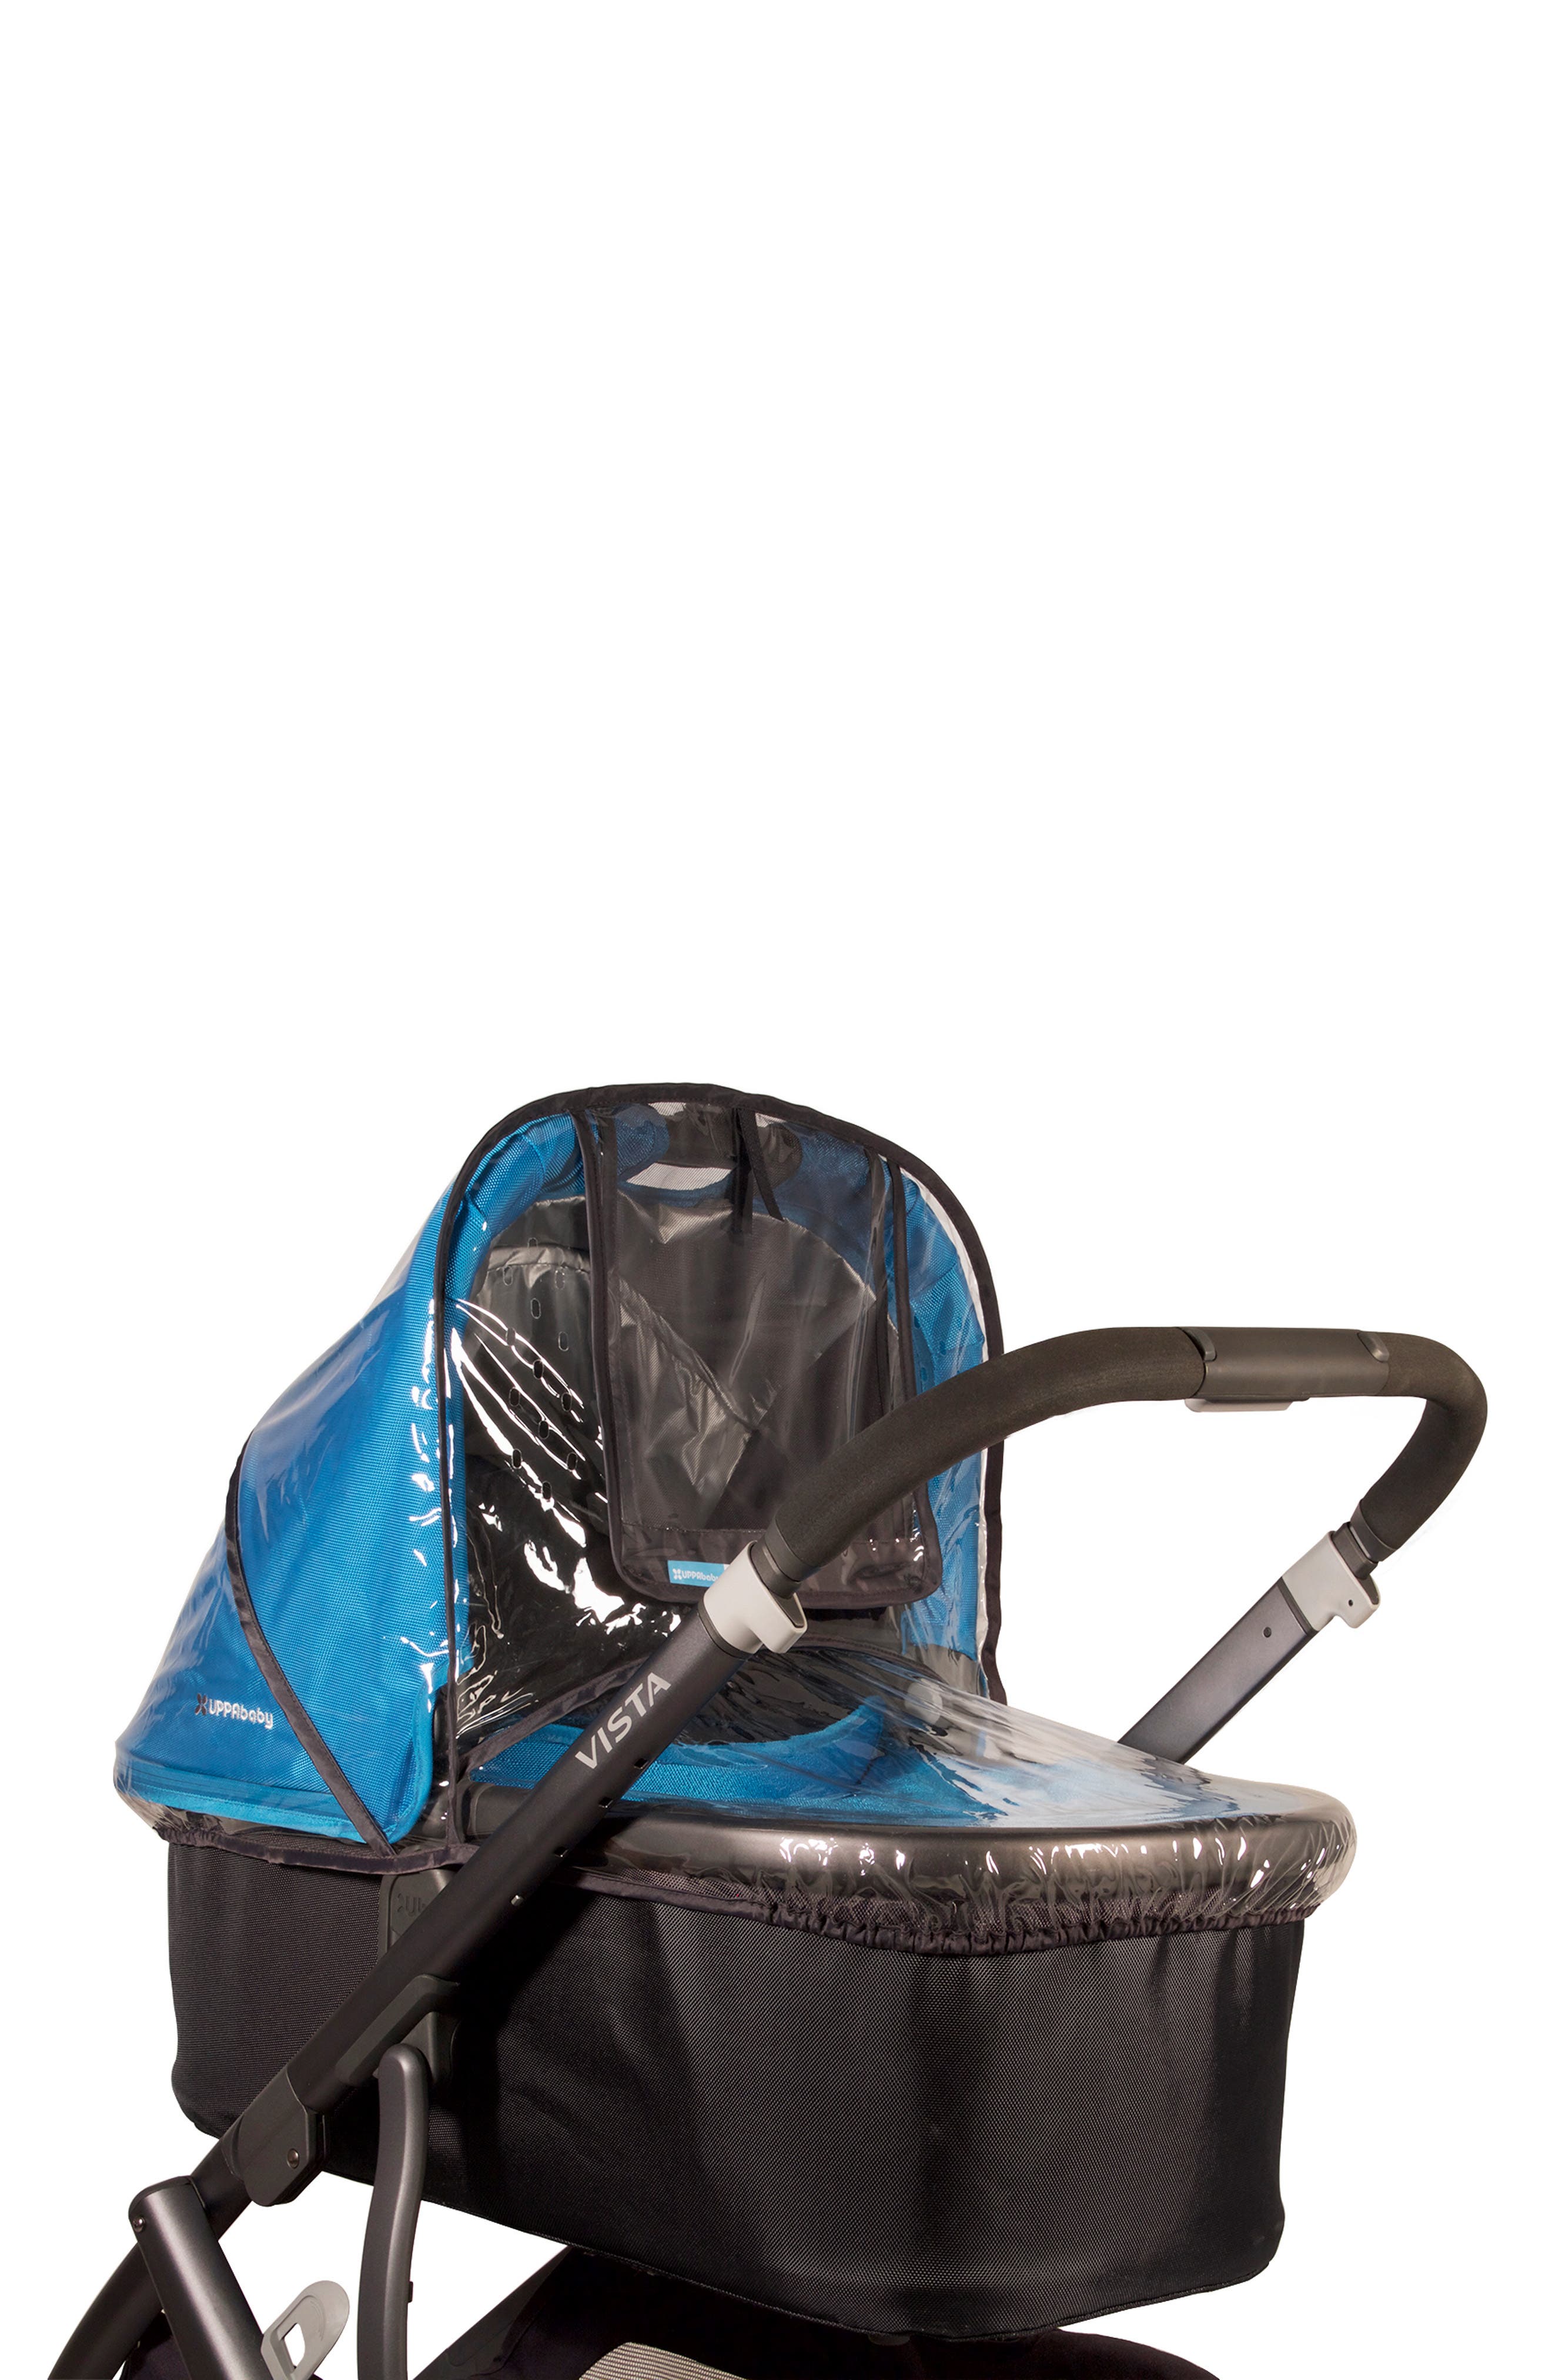 uppababy carrycot rain cover